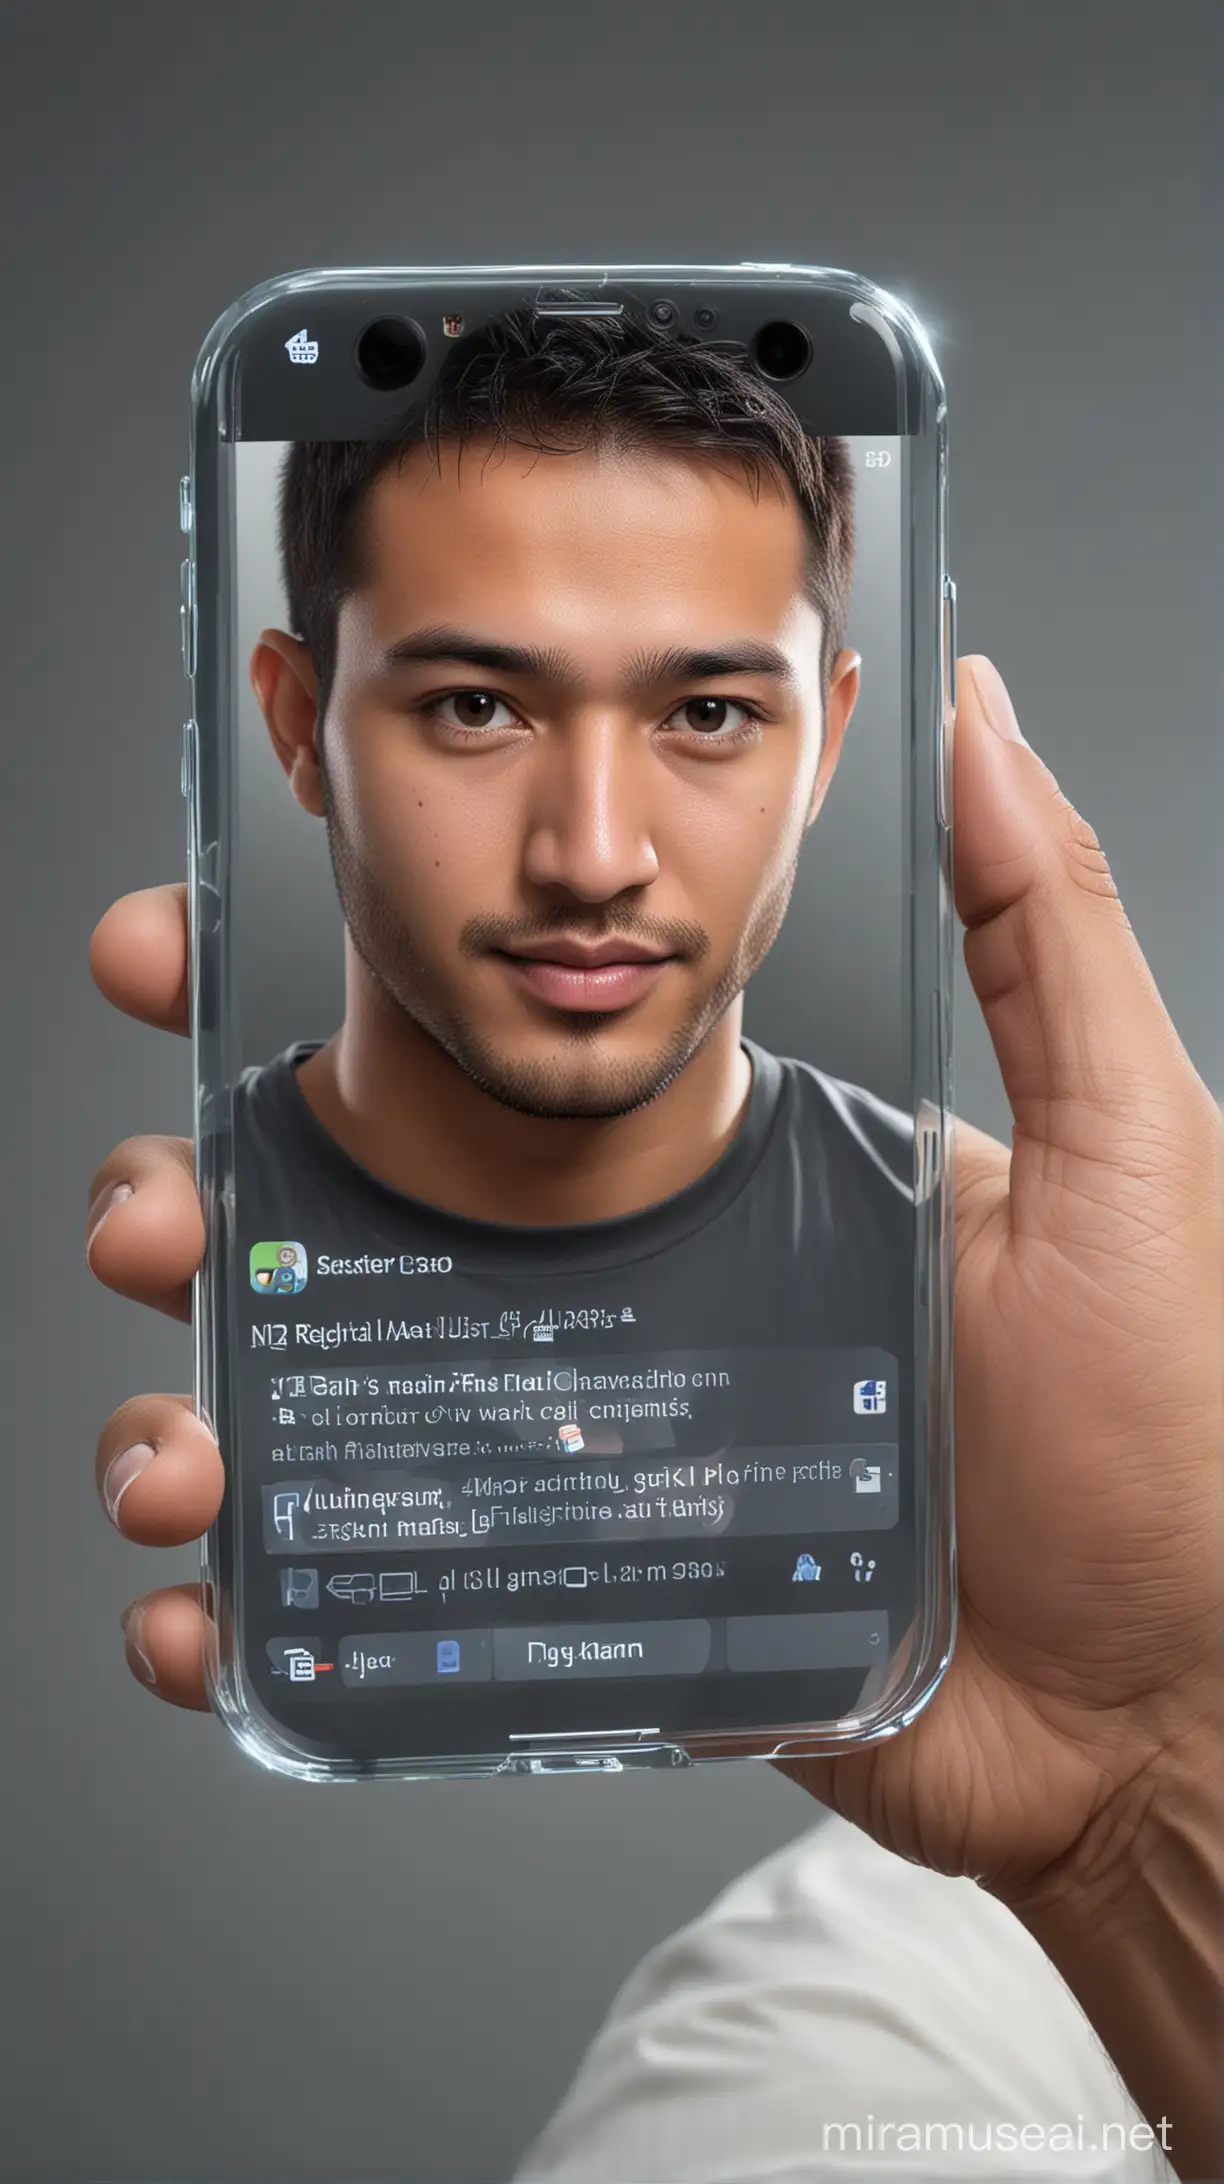 Futuristic Cell Phone with Hyperrealistic Holographic Interface Featuring Nurman on Facebook